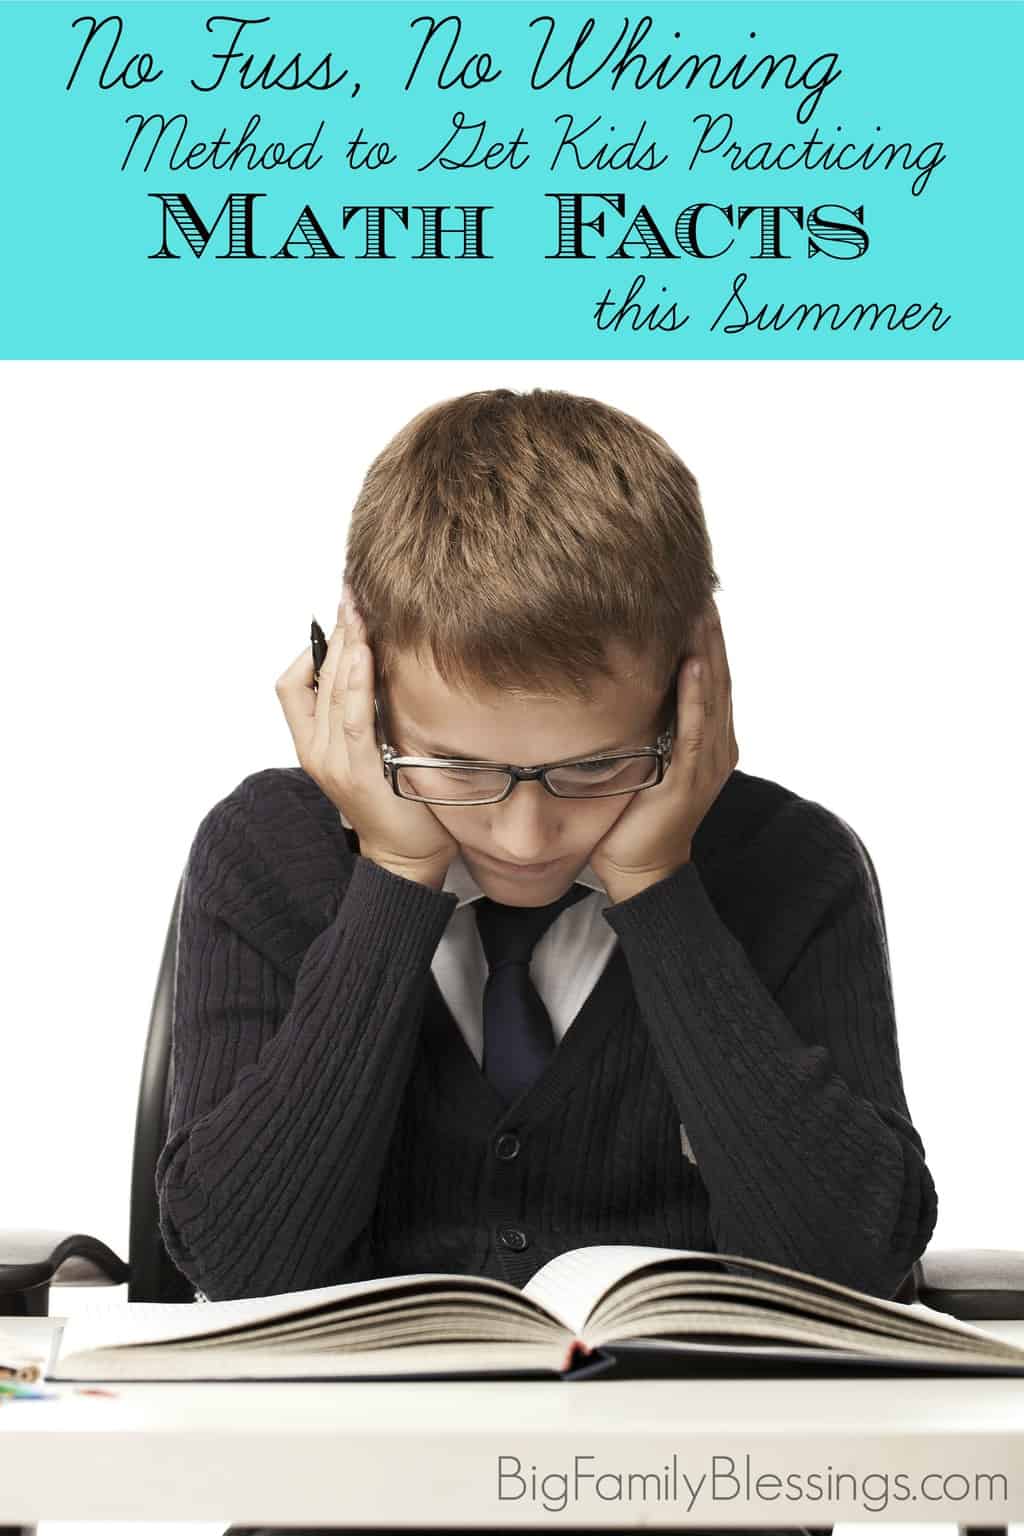 This summer I've found a great way to get my kids to practice their math facts every day. Better yet, it's a no fuss, no whining, no arguing method to get children practicing math facts during summer break. And it's so simple!